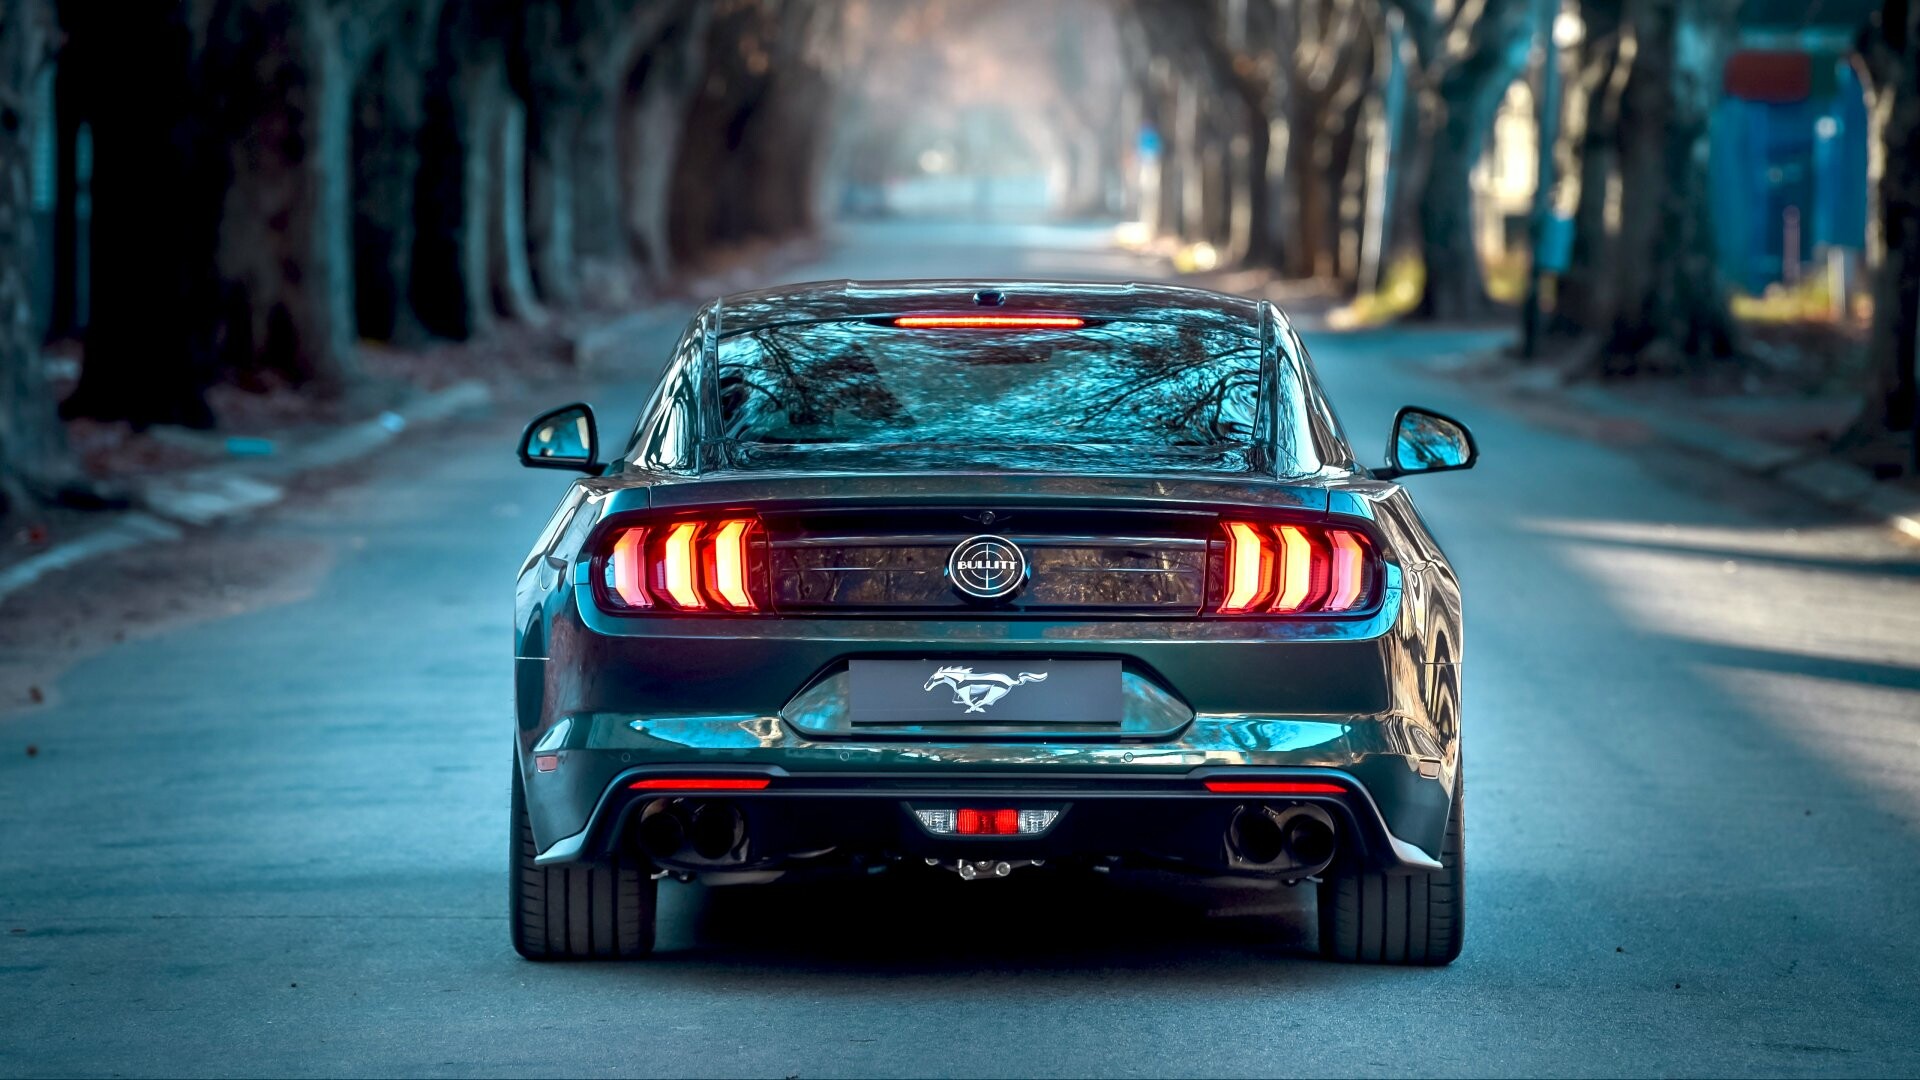 Ford: Mustang Bullitt, A legendary performance car, 5.0L Ti-VCT Coyote engine. 1920x1080 Full HD Background.